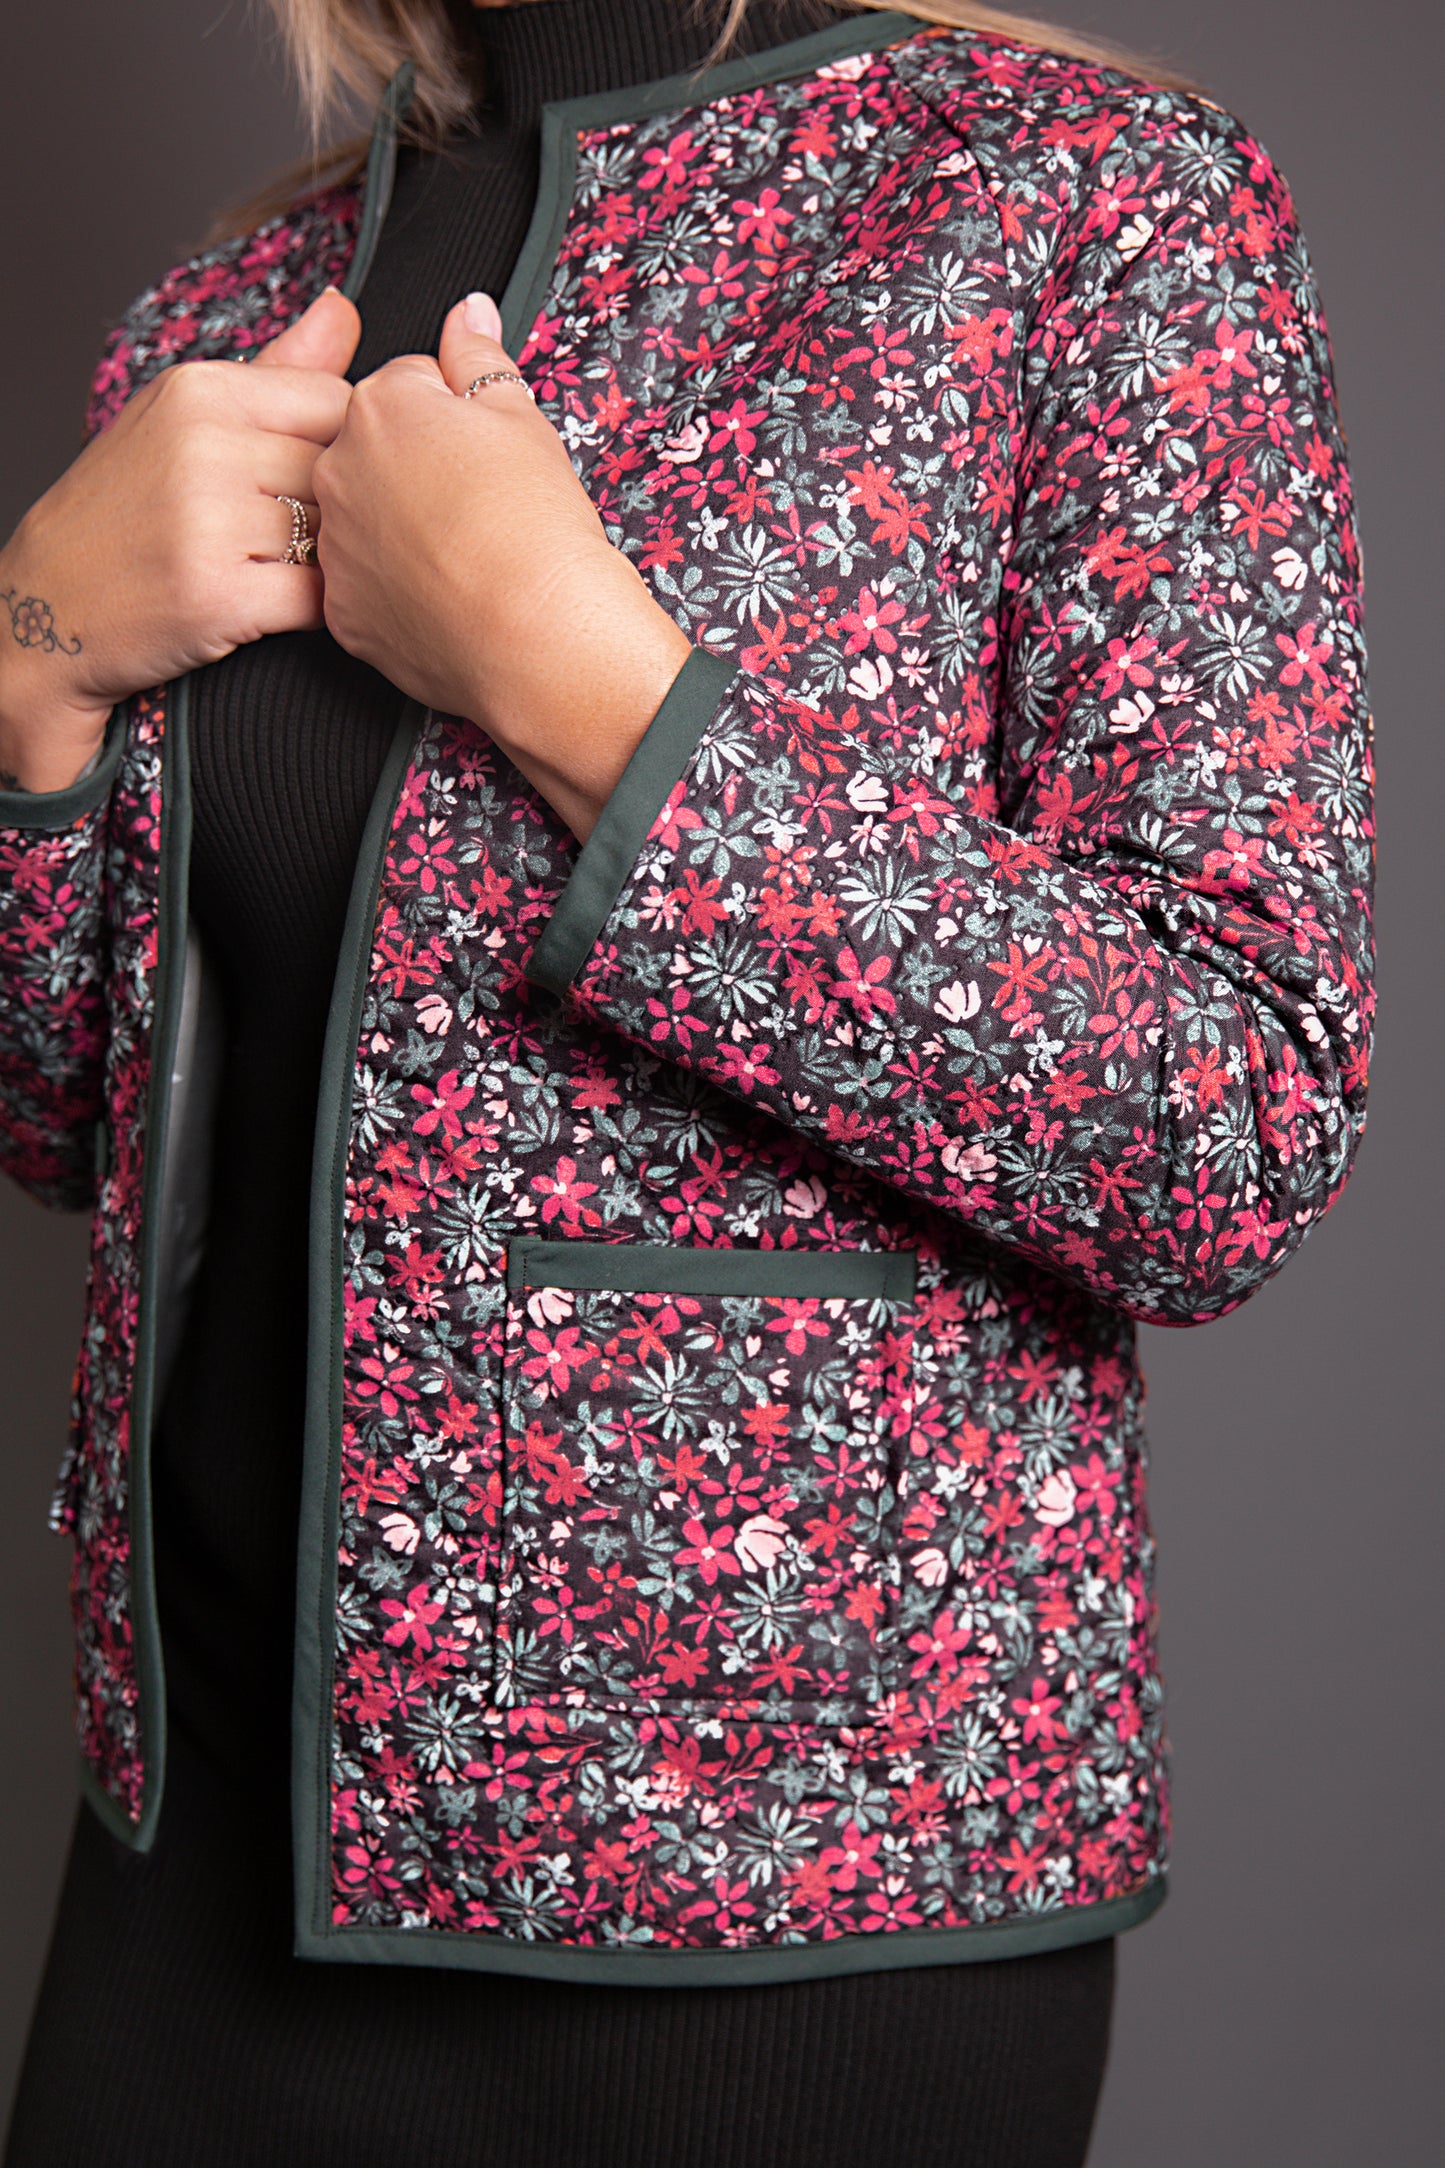 The Everyday Jacket Sewing Pattern